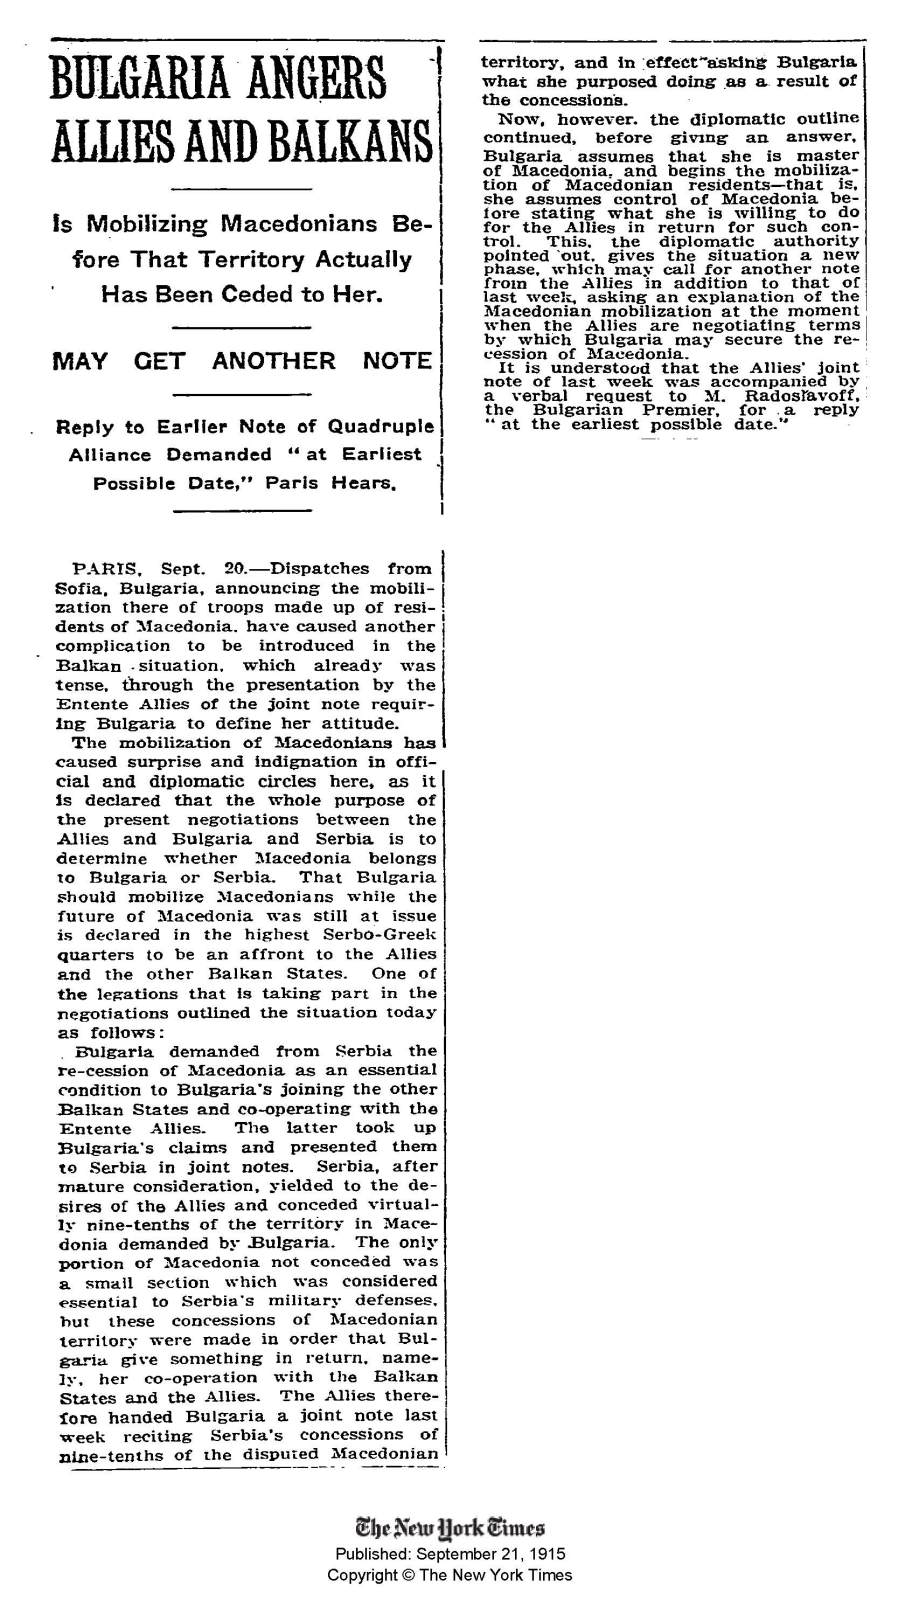 1915.09.21_The New York Times - Bulgaria anger allies and Balkans